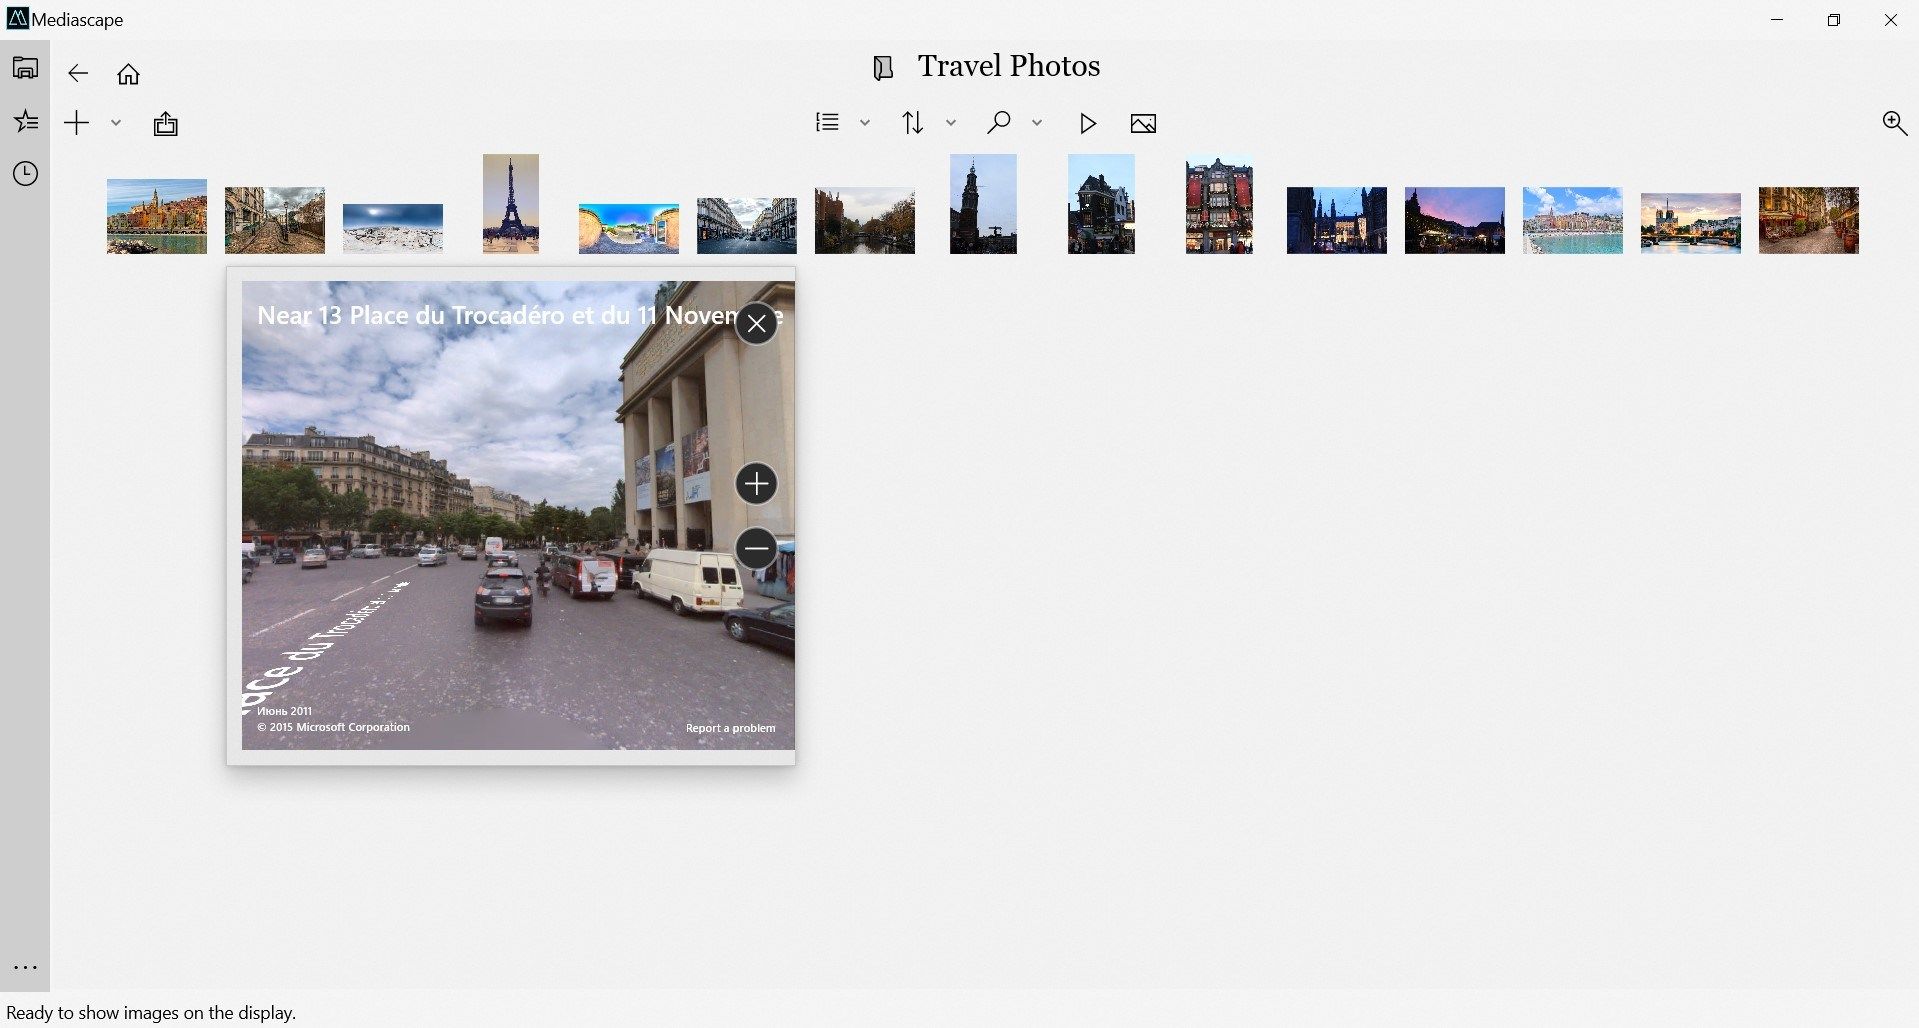 Group by geolocation and enjoy streetview